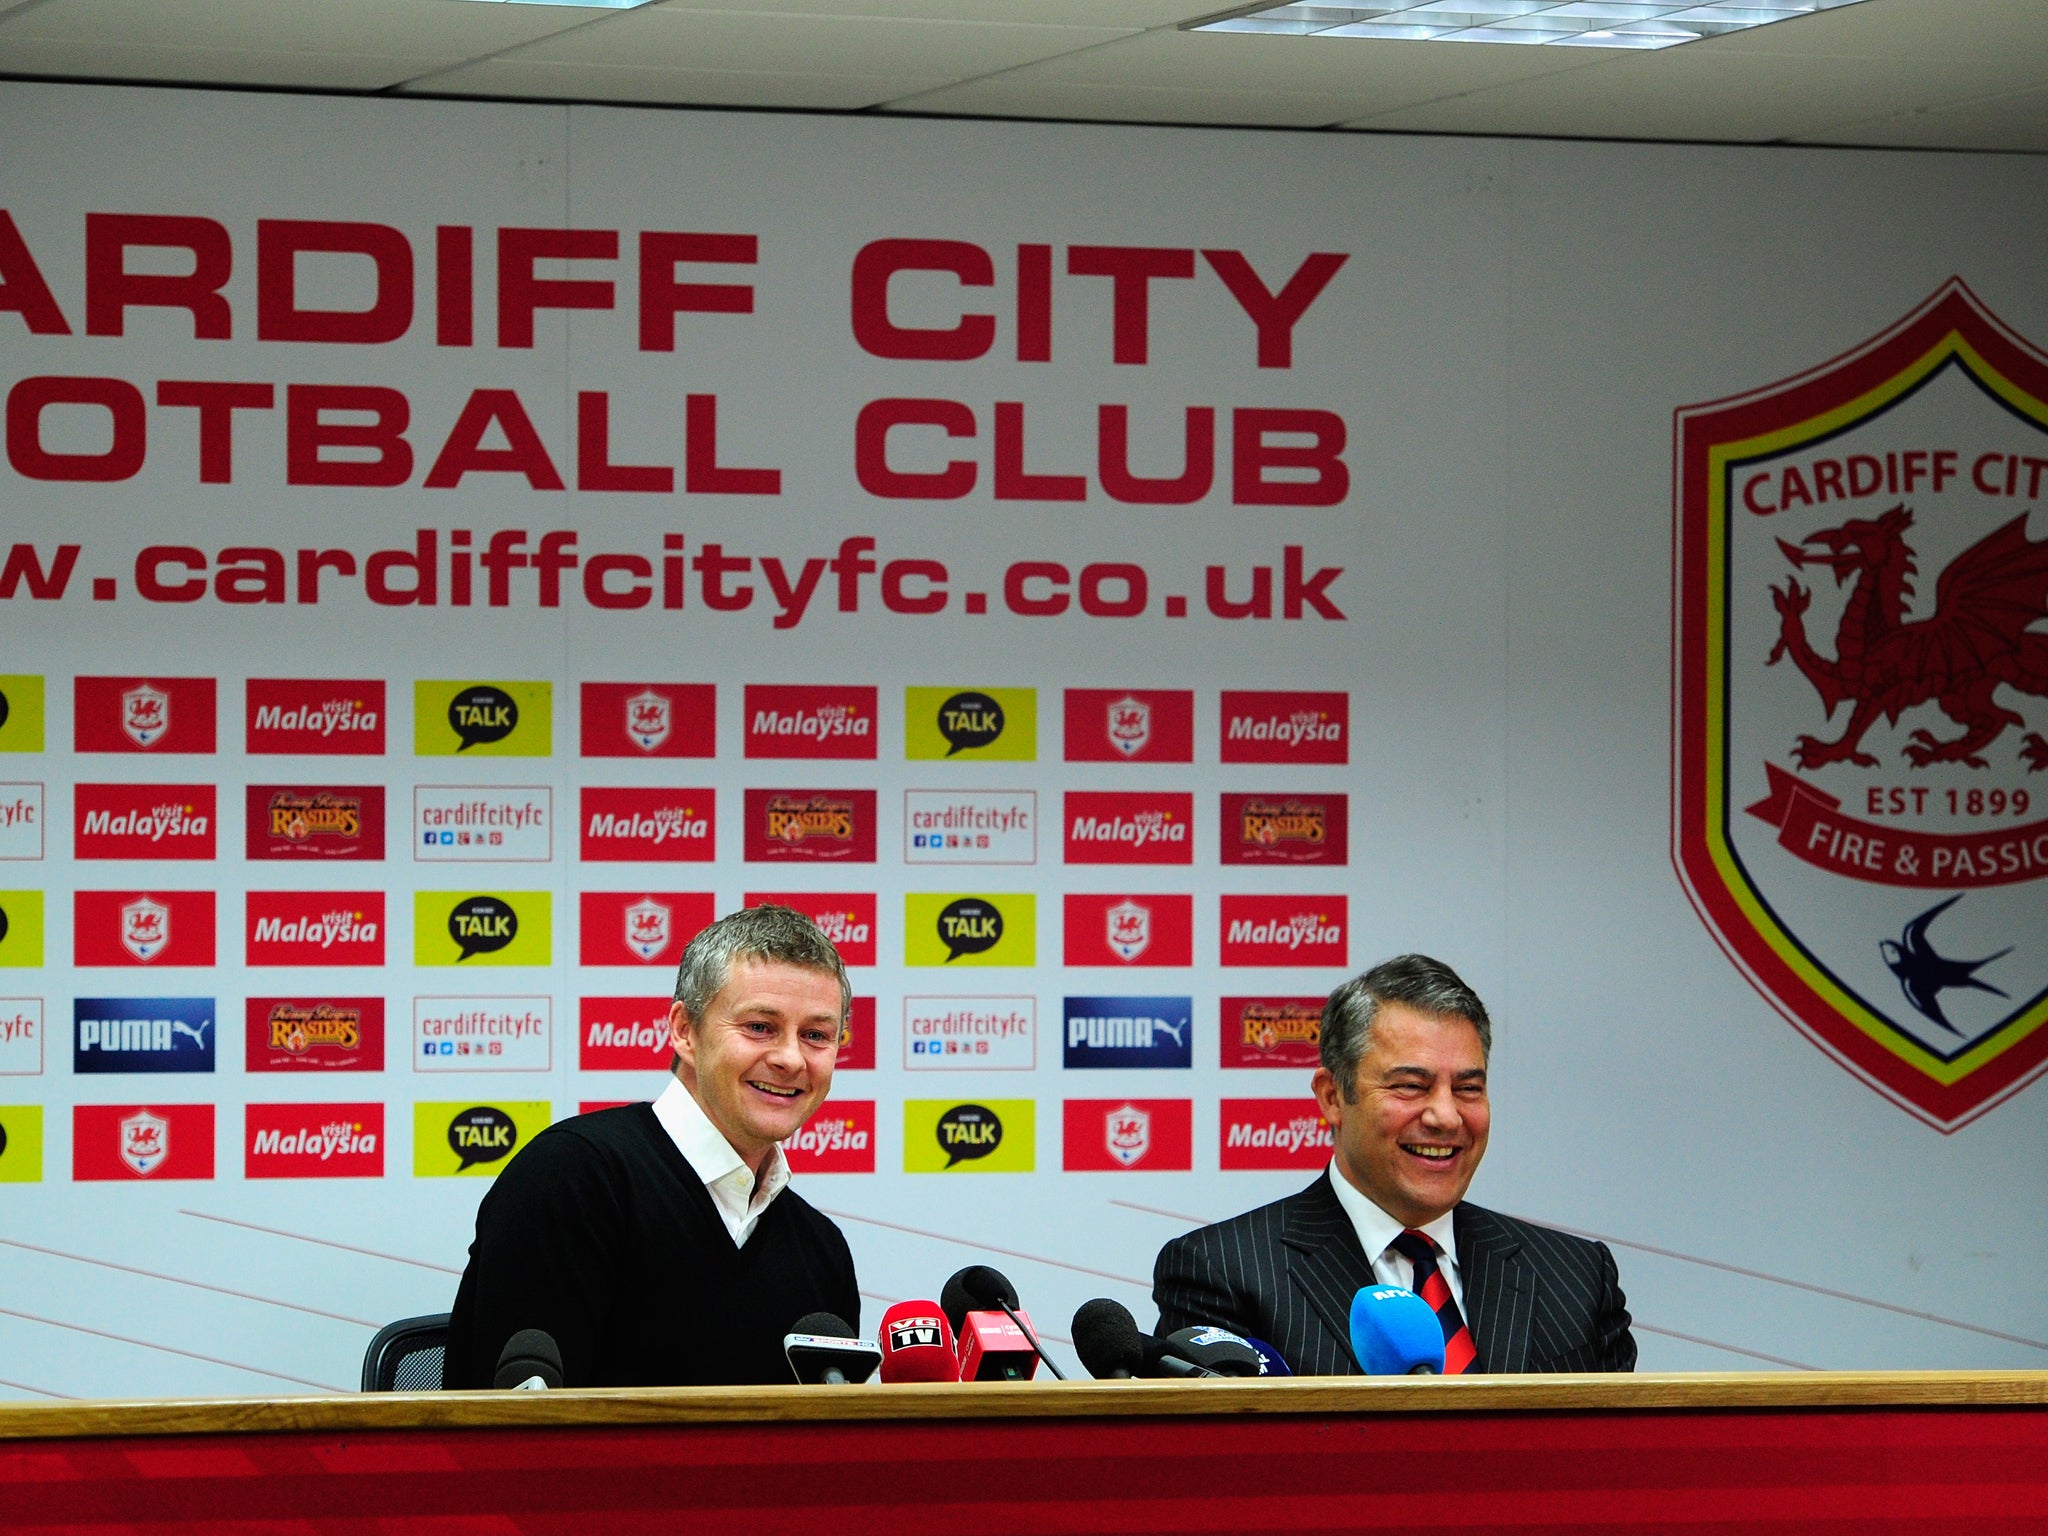 Ole Gunnar Solskjaer talks to the press following his appointment